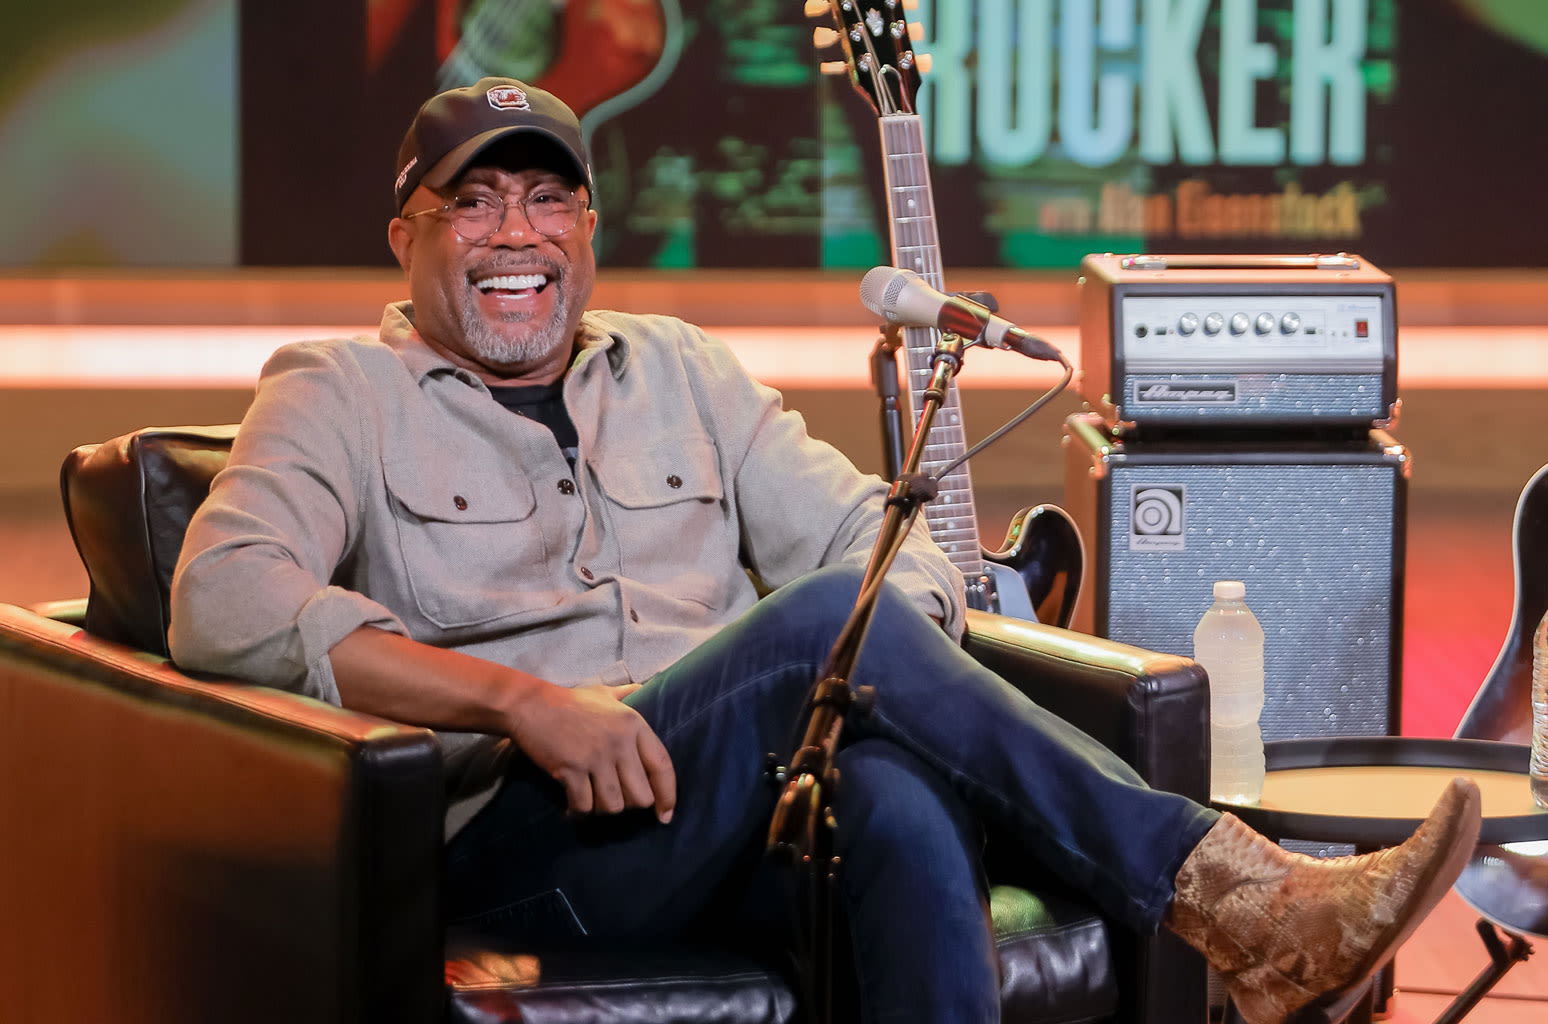 Darius Rucker’s First Memoir & More Country Music Books to Add to Your Reading List